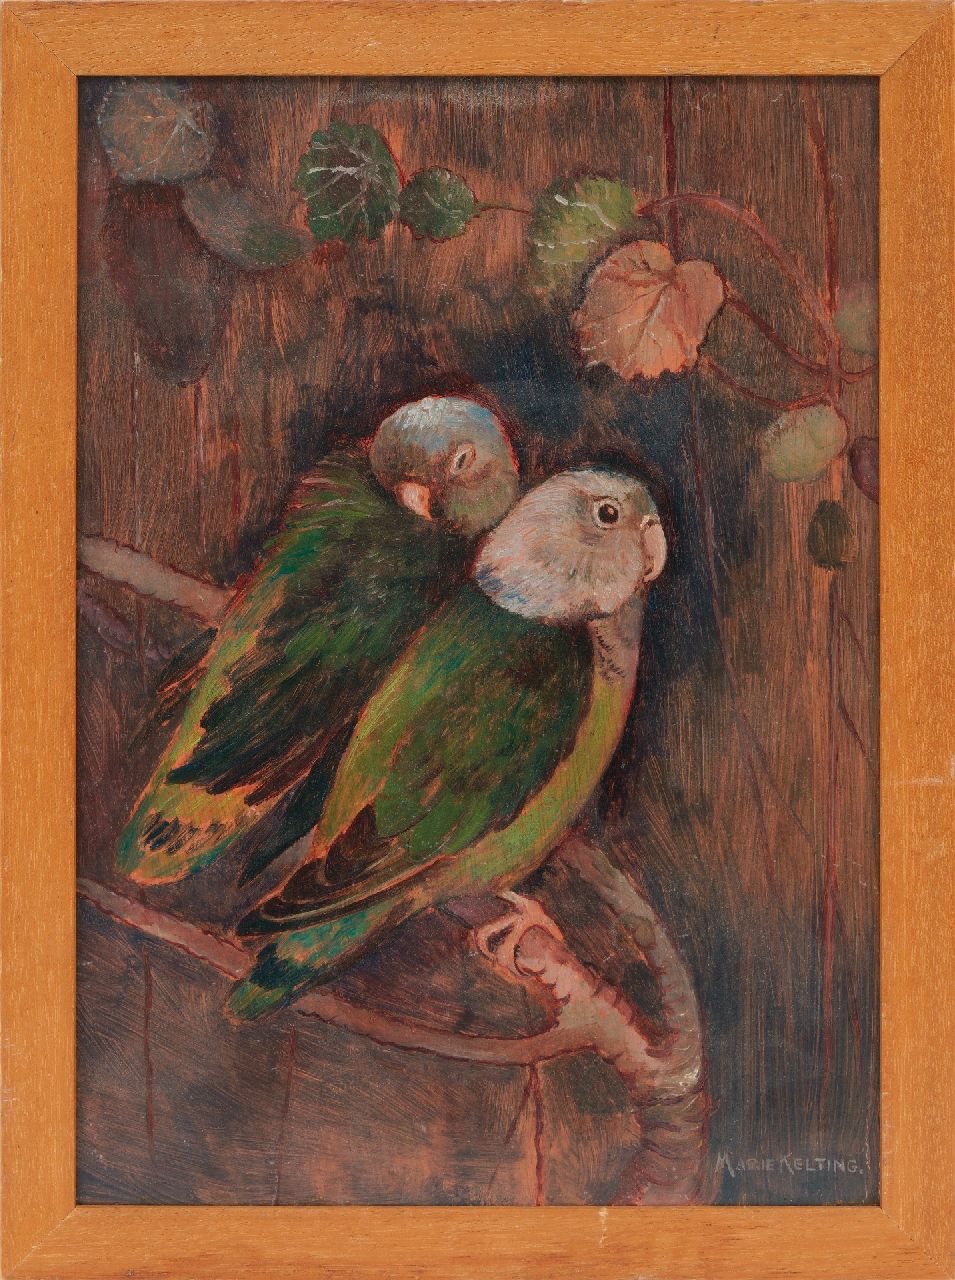 Kelting M.  | Maria 'Marie' Kelting, Two parkeets, oil on board 23.1 x 16.6 cm, signed l.r.